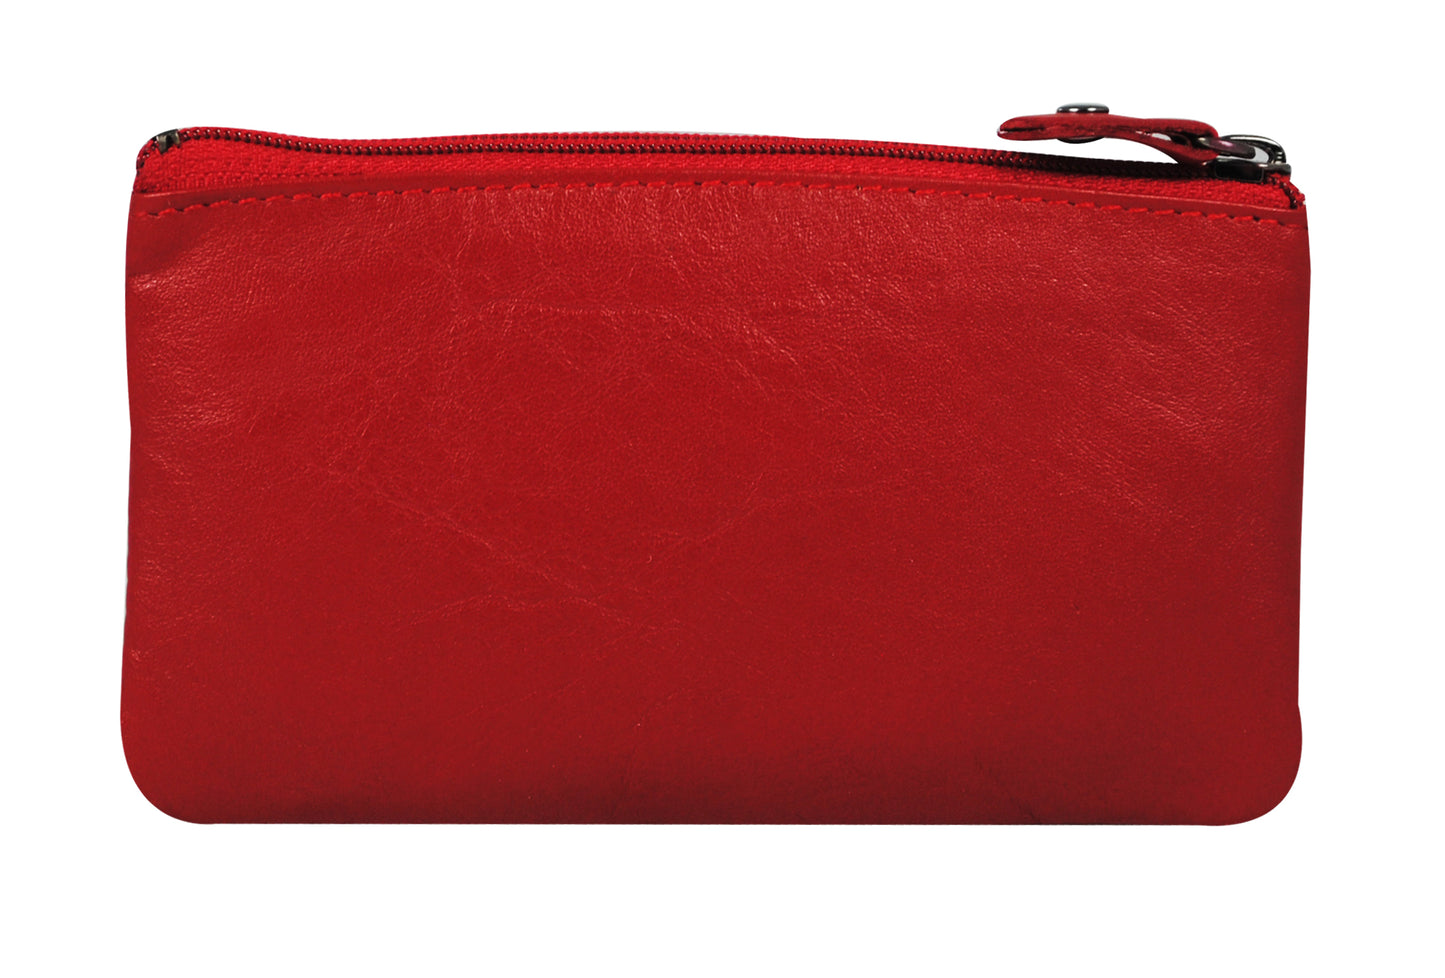 Calfnero Genuine Leather Key Case,Coin Wallet (1989-Red)